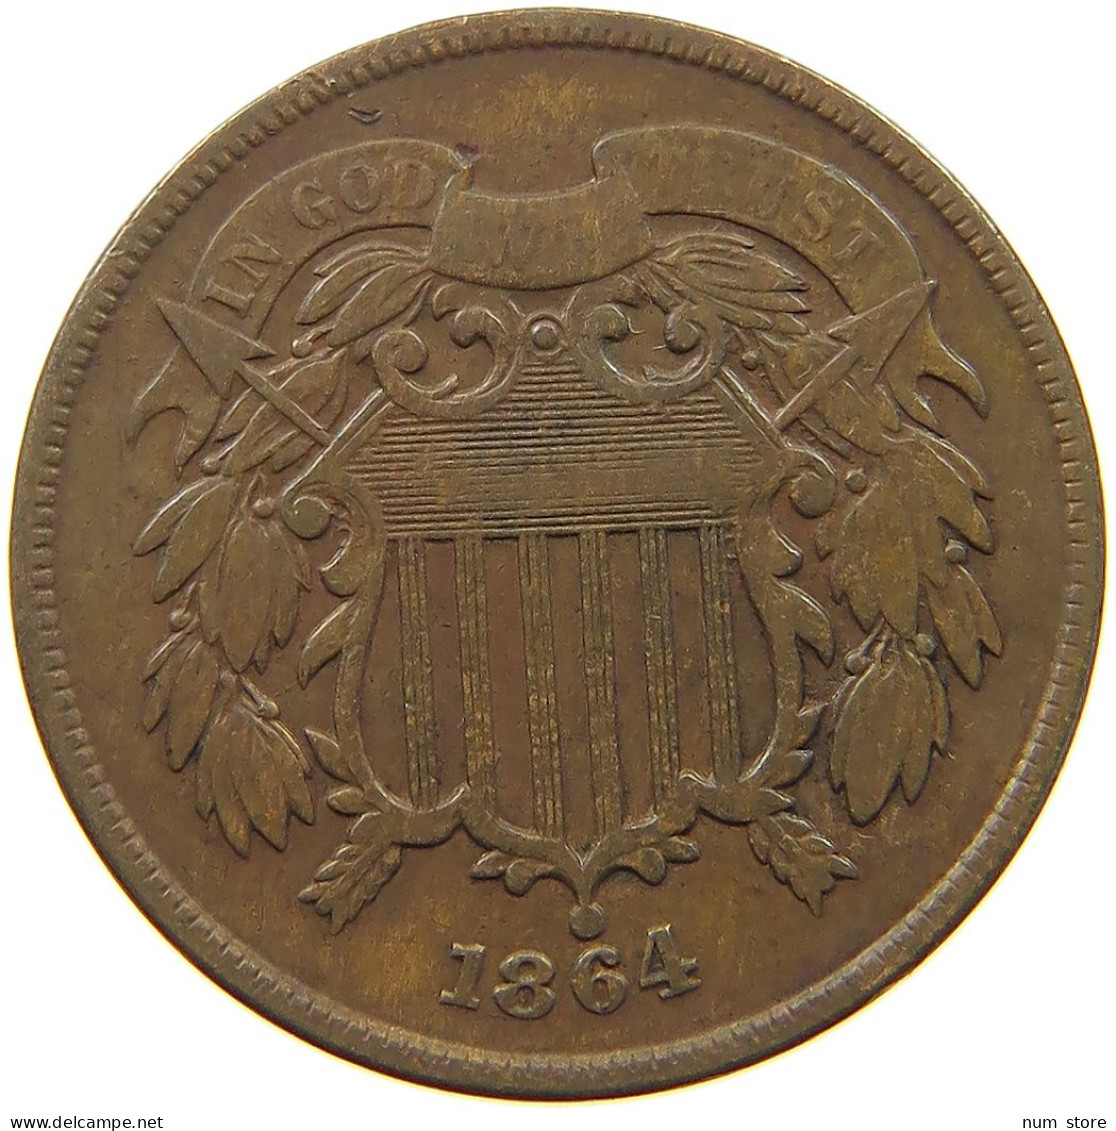 UNITED STATES OF AMERICA 2 CENTS 1864  #a011 0643 - 2, 3 & 20 Cent